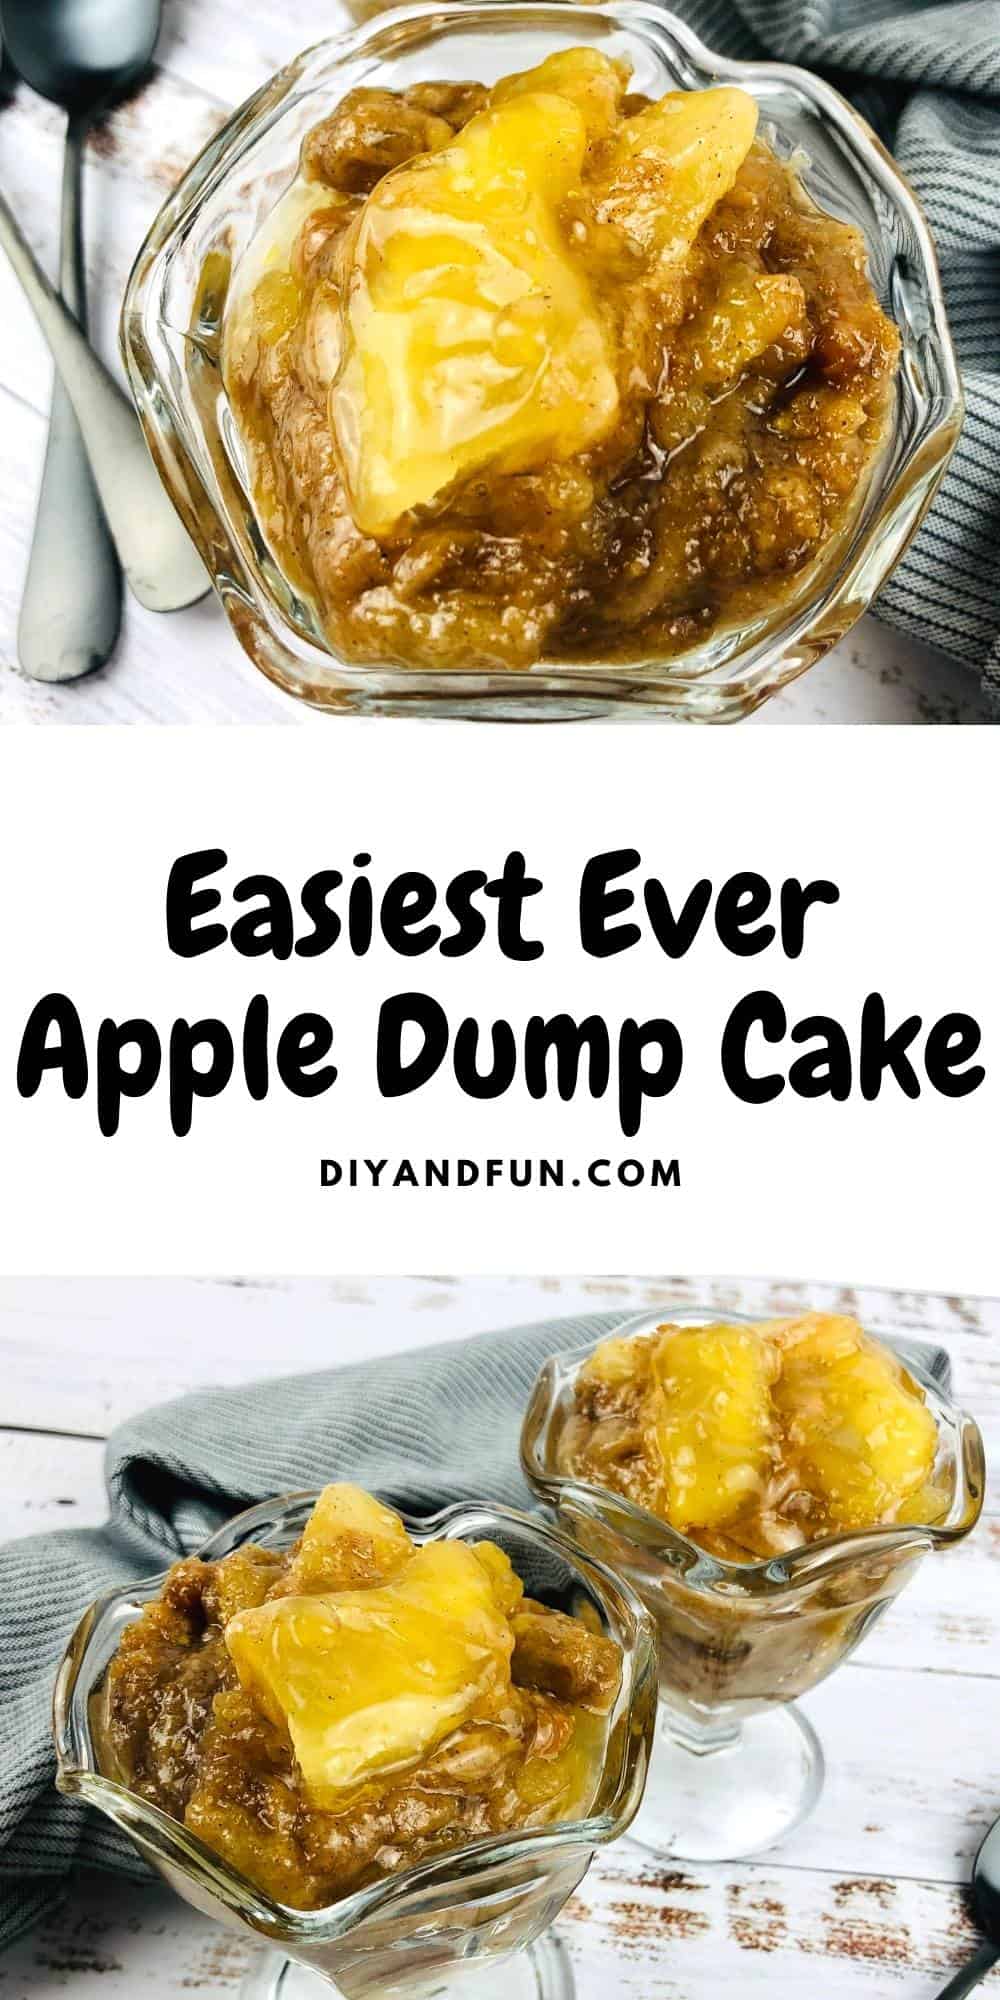 Easiest Ever Apple Dump Cake, a simple and delicious fall inspired dessert recipe that tastes like caramel apple pie.